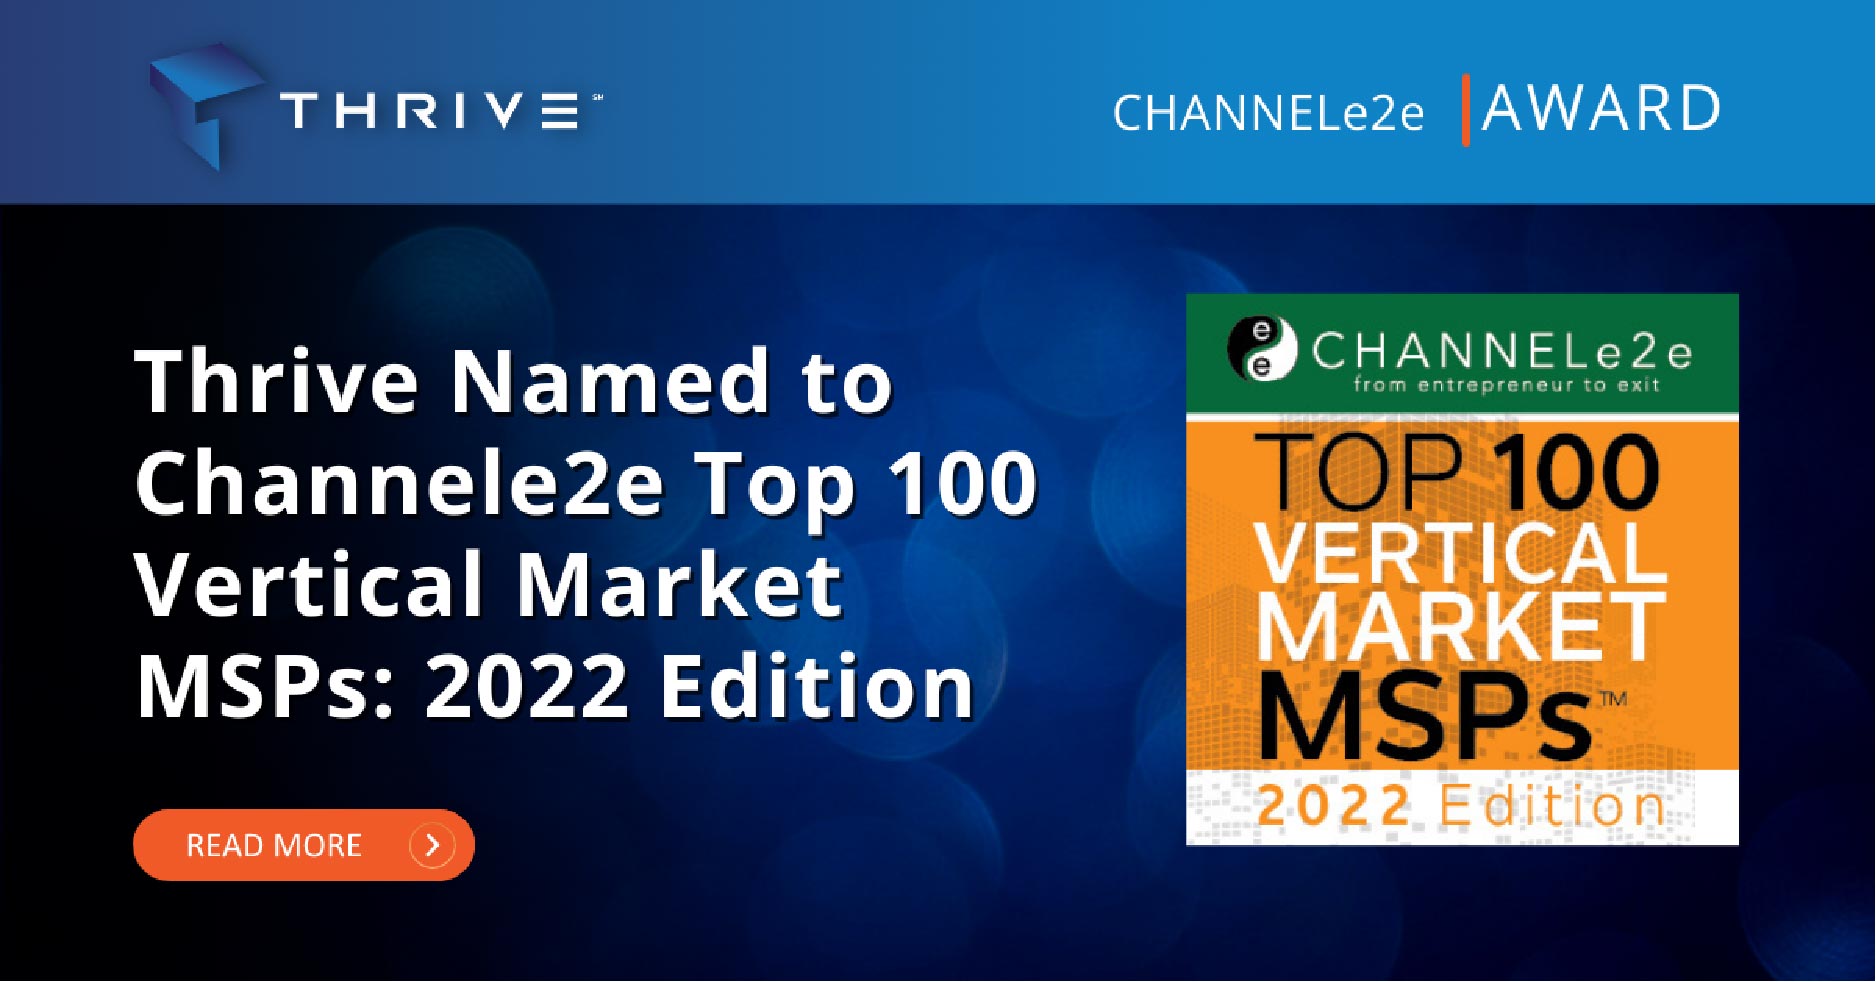 Thrive Named to Channele2e Top 100 Vertical Market MSPs: 2022 Edition